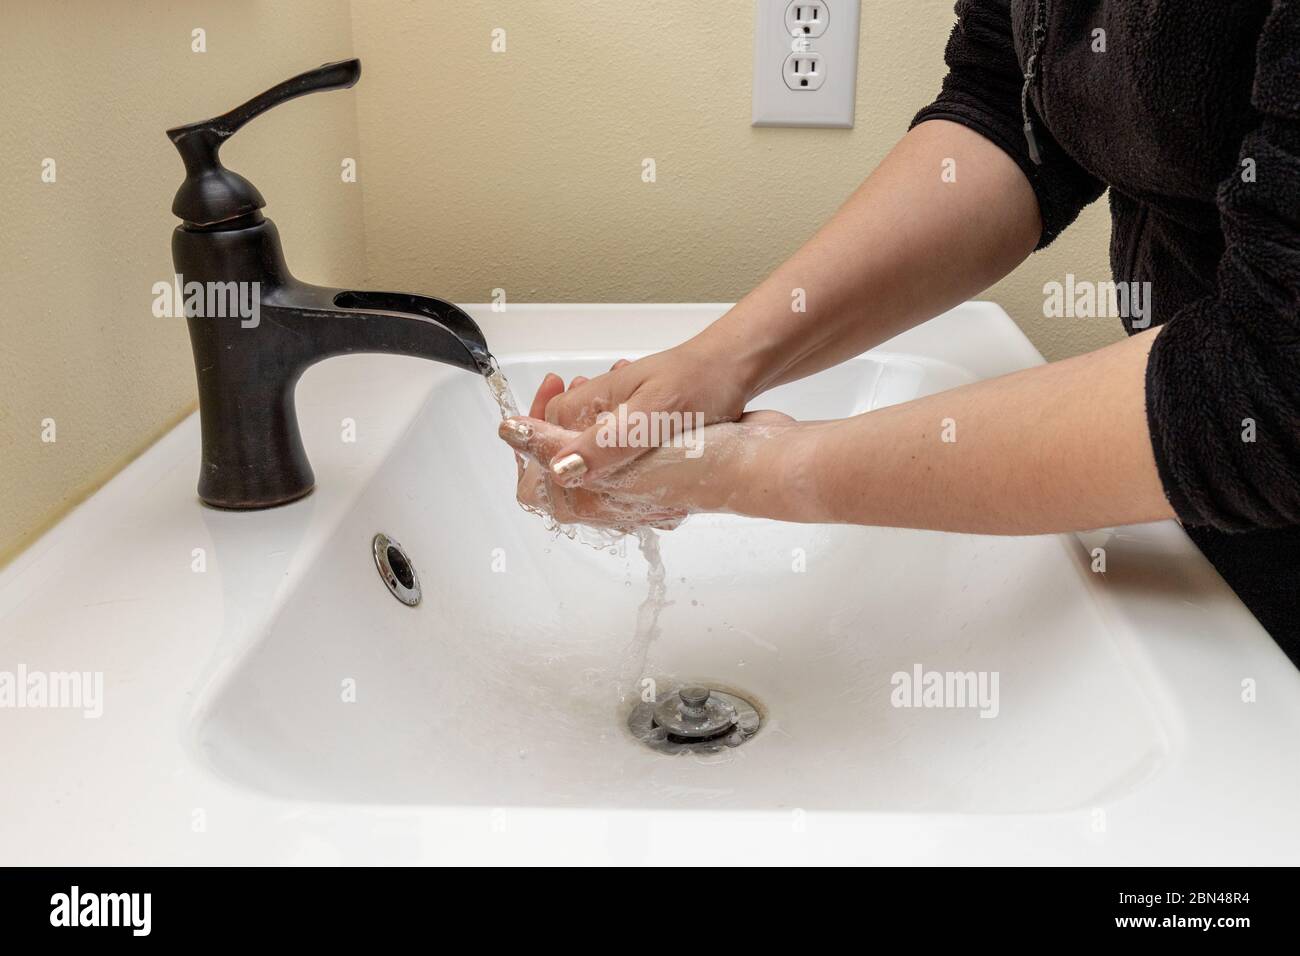 Female Washing Hands with Soapy Water to Protect Against Germs Stock Photo